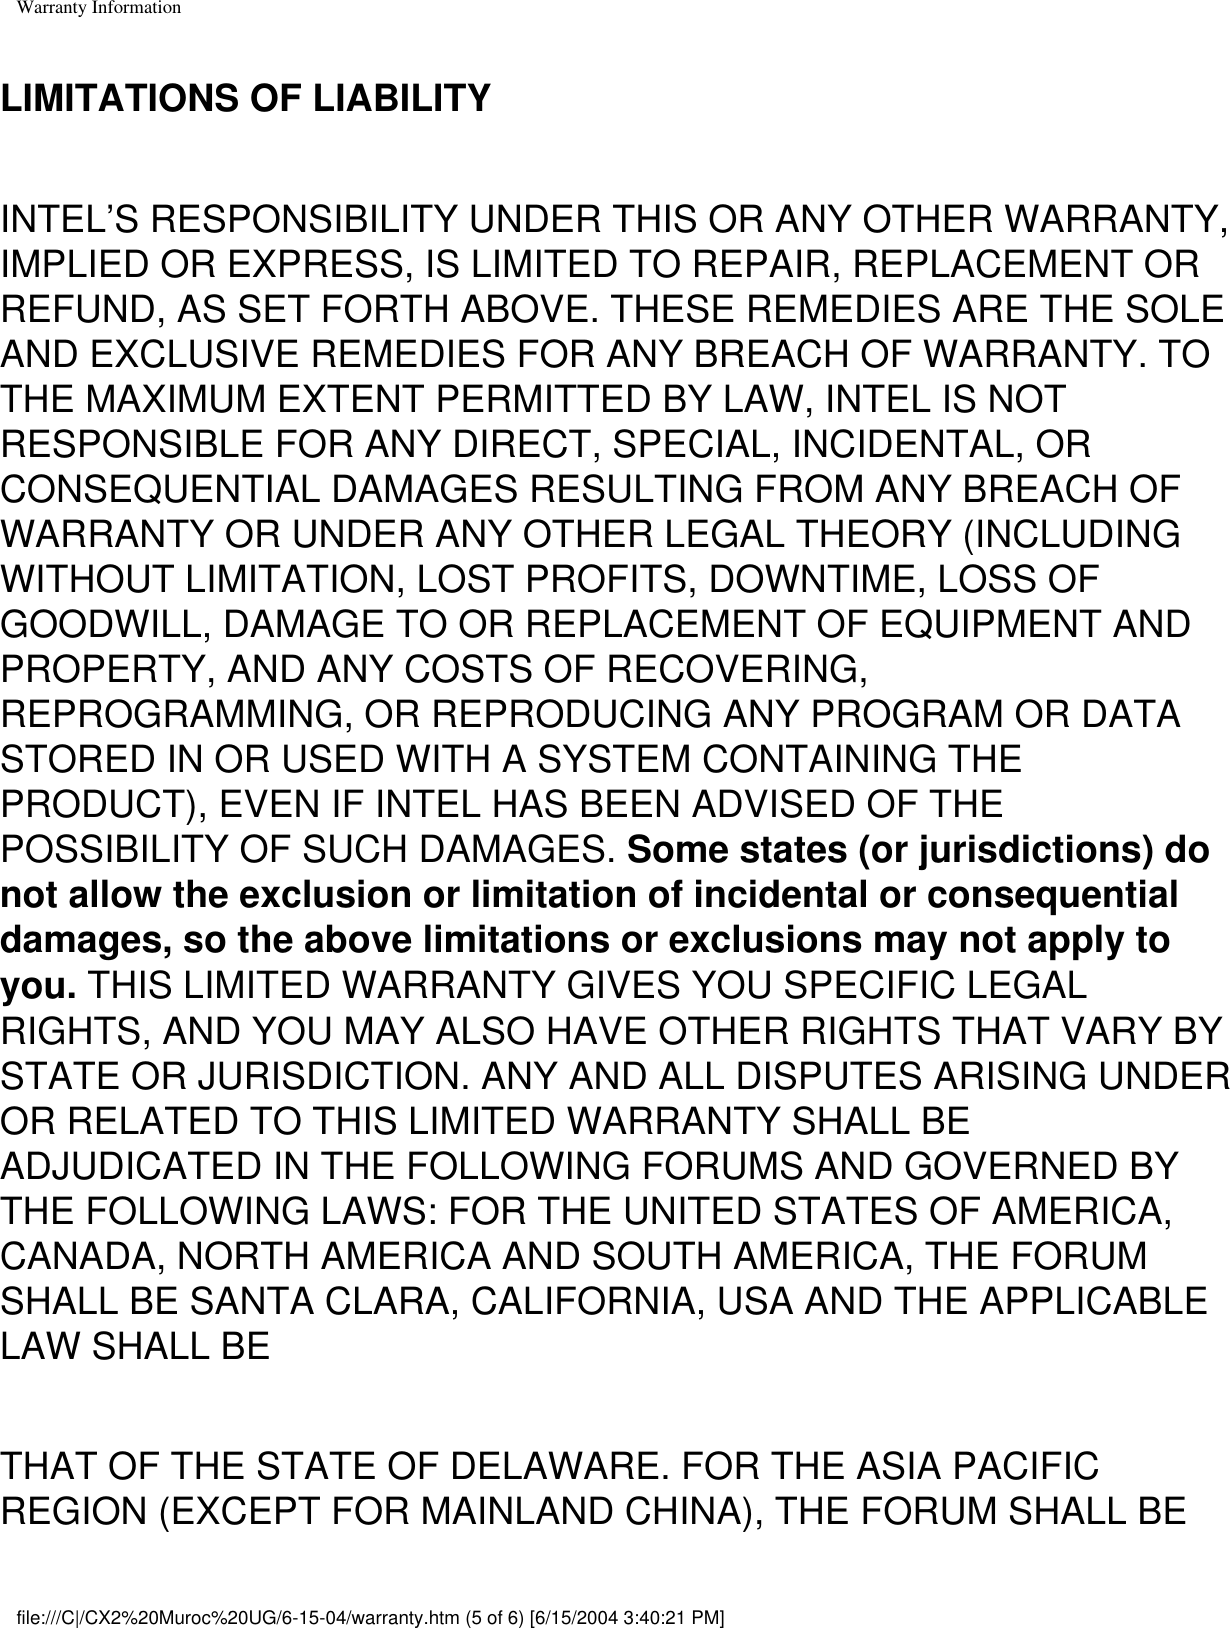 Warranty InformationLIMITATIONS OF LIABILITYINTEL’S RESPONSIBILITY UNDER THIS OR ANY OTHER WARRANTY, IMPLIED OR EXPRESS, IS LIMITED TO REPAIR, REPLACEMENT OR REFUND, AS SET FORTH ABOVE. THESE REMEDIES ARE THE SOLE AND EXCLUSIVE REMEDIES FOR ANY BREACH OF WARRANTY. TO THE MAXIMUM EXTENT PERMITTED BY LAW, INTEL IS NOT RESPONSIBLE FOR ANY DIRECT, SPECIAL, INCIDENTAL, OR CONSEQUENTIAL DAMAGES RESULTING FROM ANY BREACH OF WARRANTY OR UNDER ANY OTHER LEGAL THEORY (INCLUDING WITHOUT LIMITATION, LOST PROFITS, DOWNTIME, LOSS OF GOODWILL, DAMAGE TO OR REPLACEMENT OF EQUIPMENT AND PROPERTY, AND ANY COSTS OF RECOVERING, REPROGRAMMING, OR REPRODUCING ANY PROGRAM OR DATA STORED IN OR USED WITH A SYSTEM CONTAINING THE PRODUCT), EVEN IF INTEL HAS BEEN ADVISED OF THE POSSIBILITY OF SUCH DAMAGES. Some states (or jurisdictions) do not allow the exclusion or limitation of incidental or consequential damages, so the above limitations or exclusions may not apply to you. THIS LIMITED WARRANTY GIVES YOU SPECIFIC LEGAL RIGHTS, AND YOU MAY ALSO HAVE OTHER RIGHTS THAT VARY BY STATE OR JURISDICTION. ANY AND ALL DISPUTES ARISING UNDER OR RELATED TO THIS LIMITED WARRANTY SHALL BE ADJUDICATED IN THE FOLLOWING FORUMS AND GOVERNED BY THE FOLLOWING LAWS: FOR THE UNITED STATES OF AMERICA, CANADA, NORTH AMERICA AND SOUTH AMERICA, THE FORUM SHALL BE SANTA CLARA, CALIFORNIA, USA AND THE APPLICABLE LAW SHALL BE THAT OF THE STATE OF DELAWARE. FOR THE ASIA PACIFIC REGION (EXCEPT FOR MAINLAND CHINA), THE FORUM SHALL BE file:///C|/CX2%20Muroc%20UG/6-15-04/warranty.htm (5 of 6) [6/15/2004 3:40:21 PM]